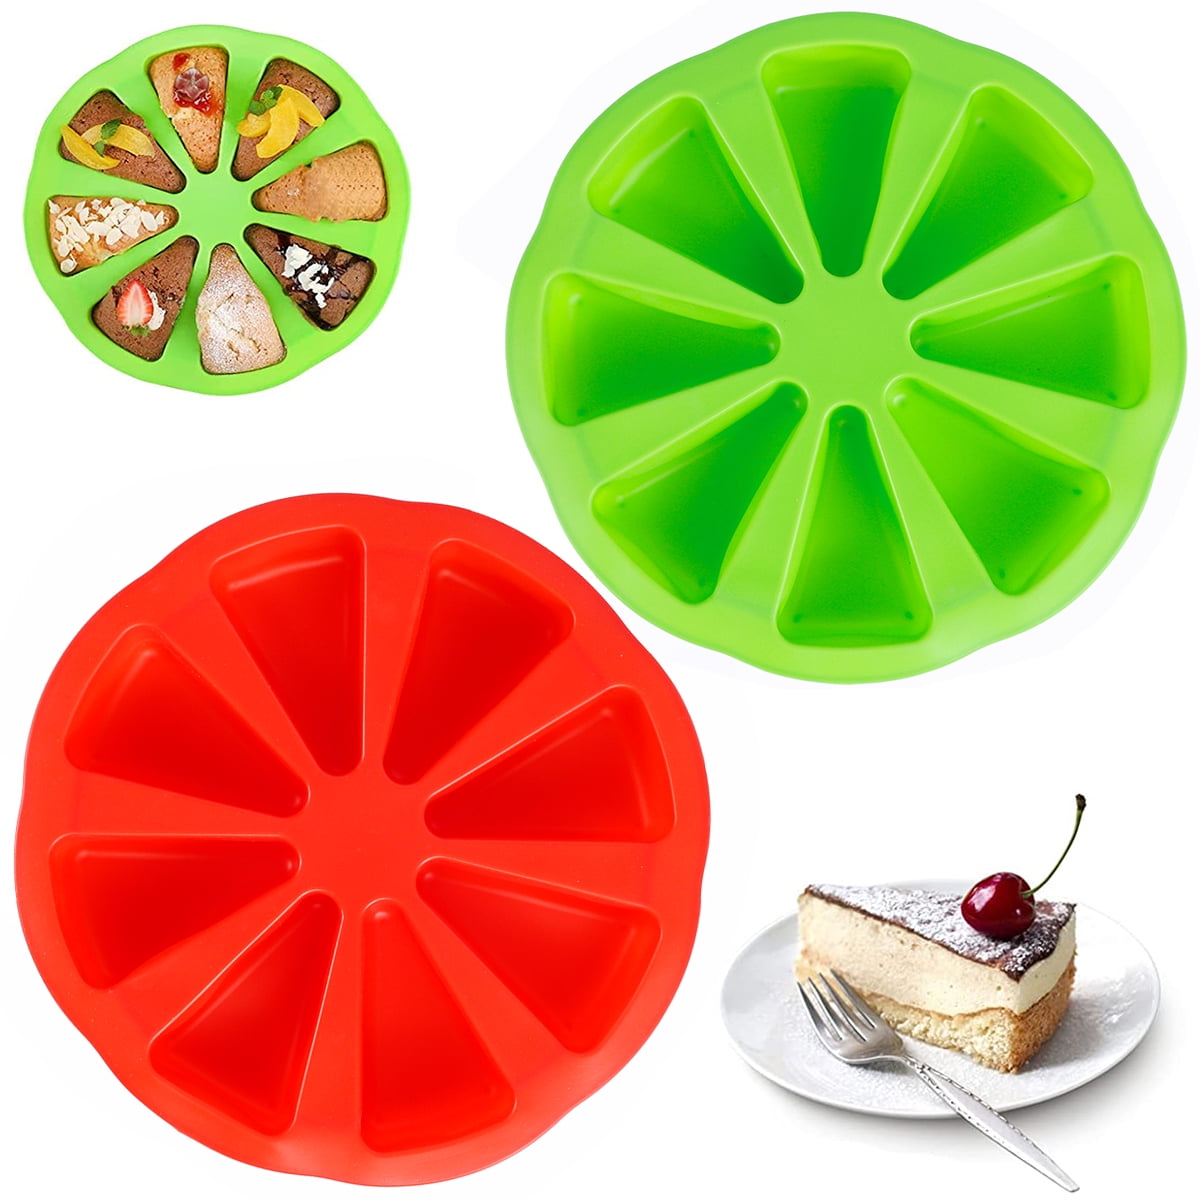 Maxi Nature Silicone Baking Moulds Set of 2